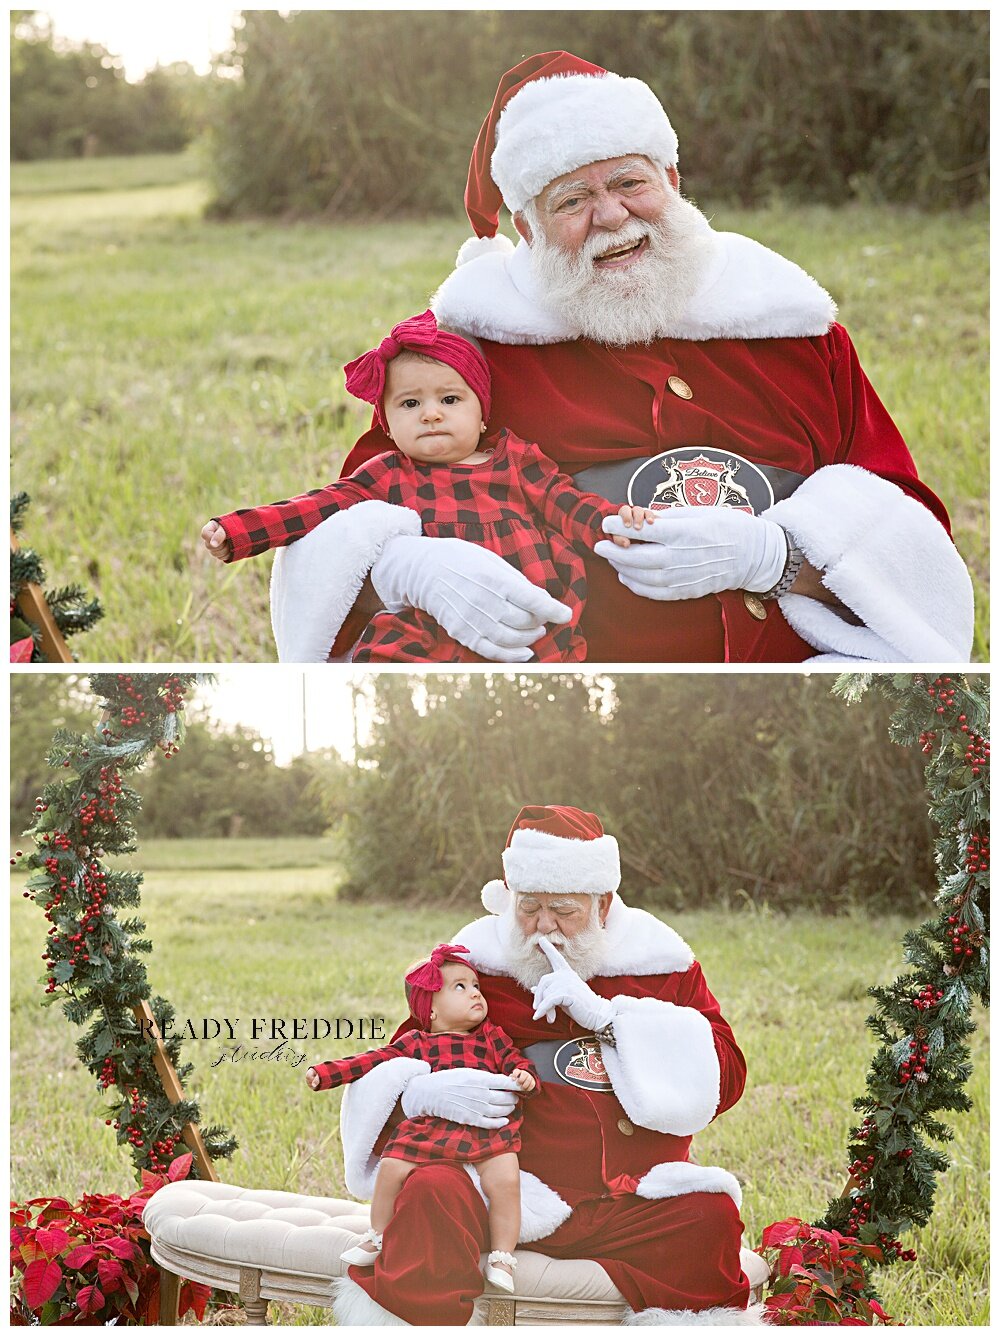 Baby girl taking pictures with Santa in Miami Florida field during sunset | Ready Freddie Studios